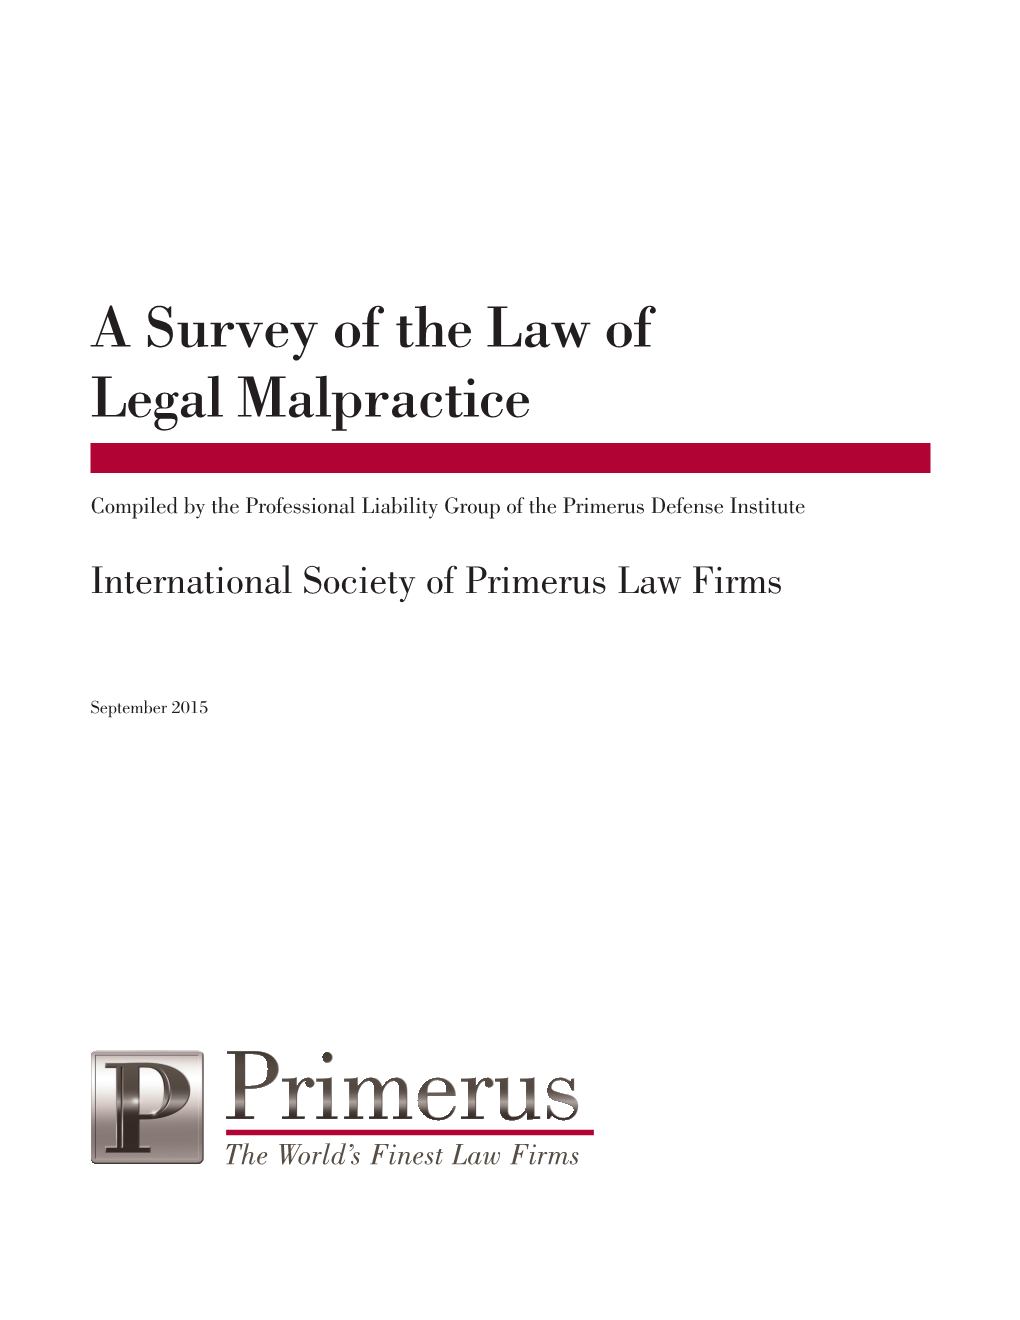 A Survey of the Law of Legal Malpractice Compendium